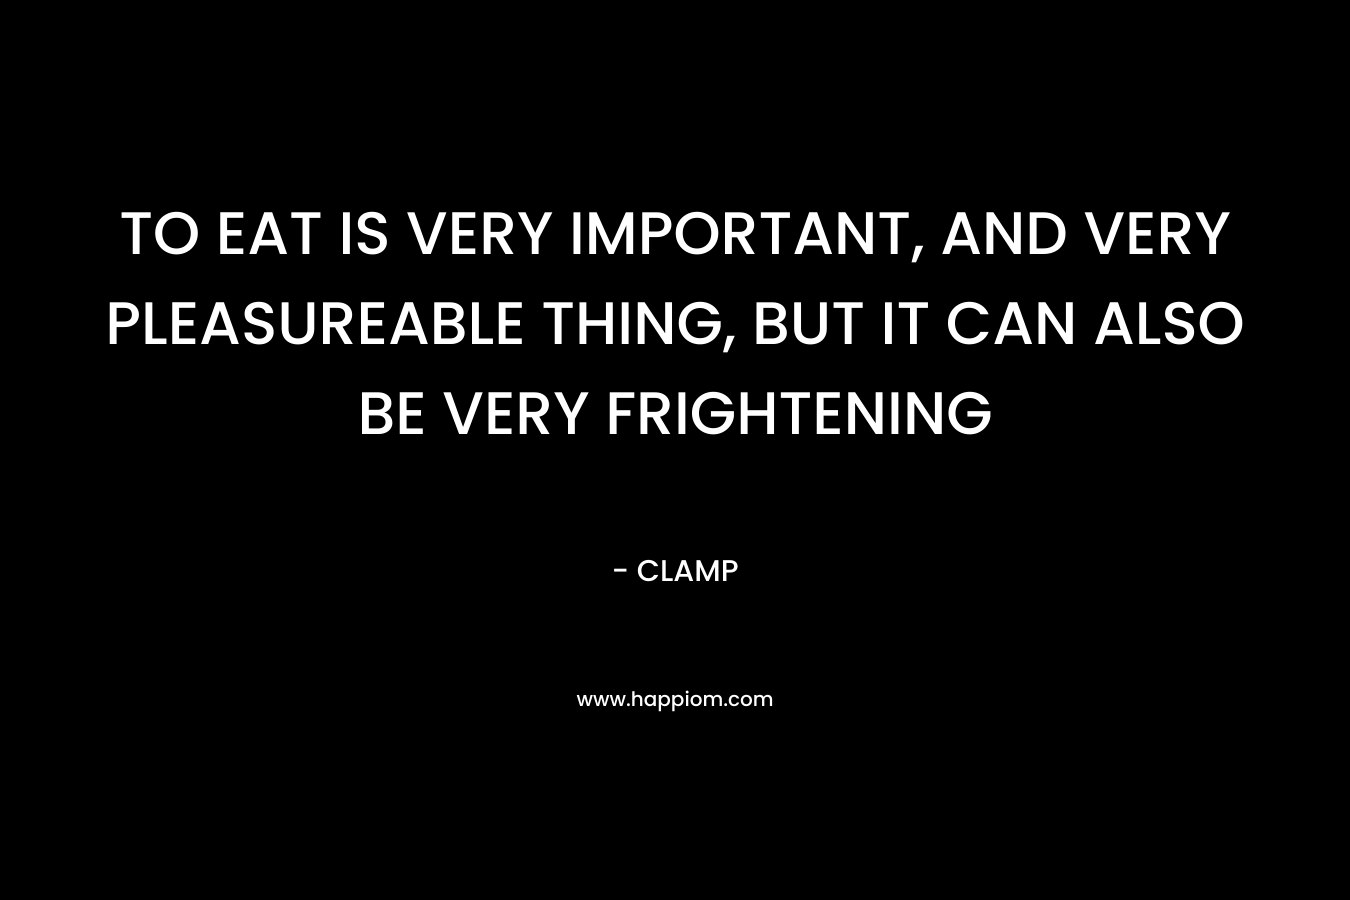 TO EAT IS VERY IMPORTANT, AND VERY PLEASUREABLE THING, BUT IT CAN ALSO BE VERY FRIGHTENING – CLAMP